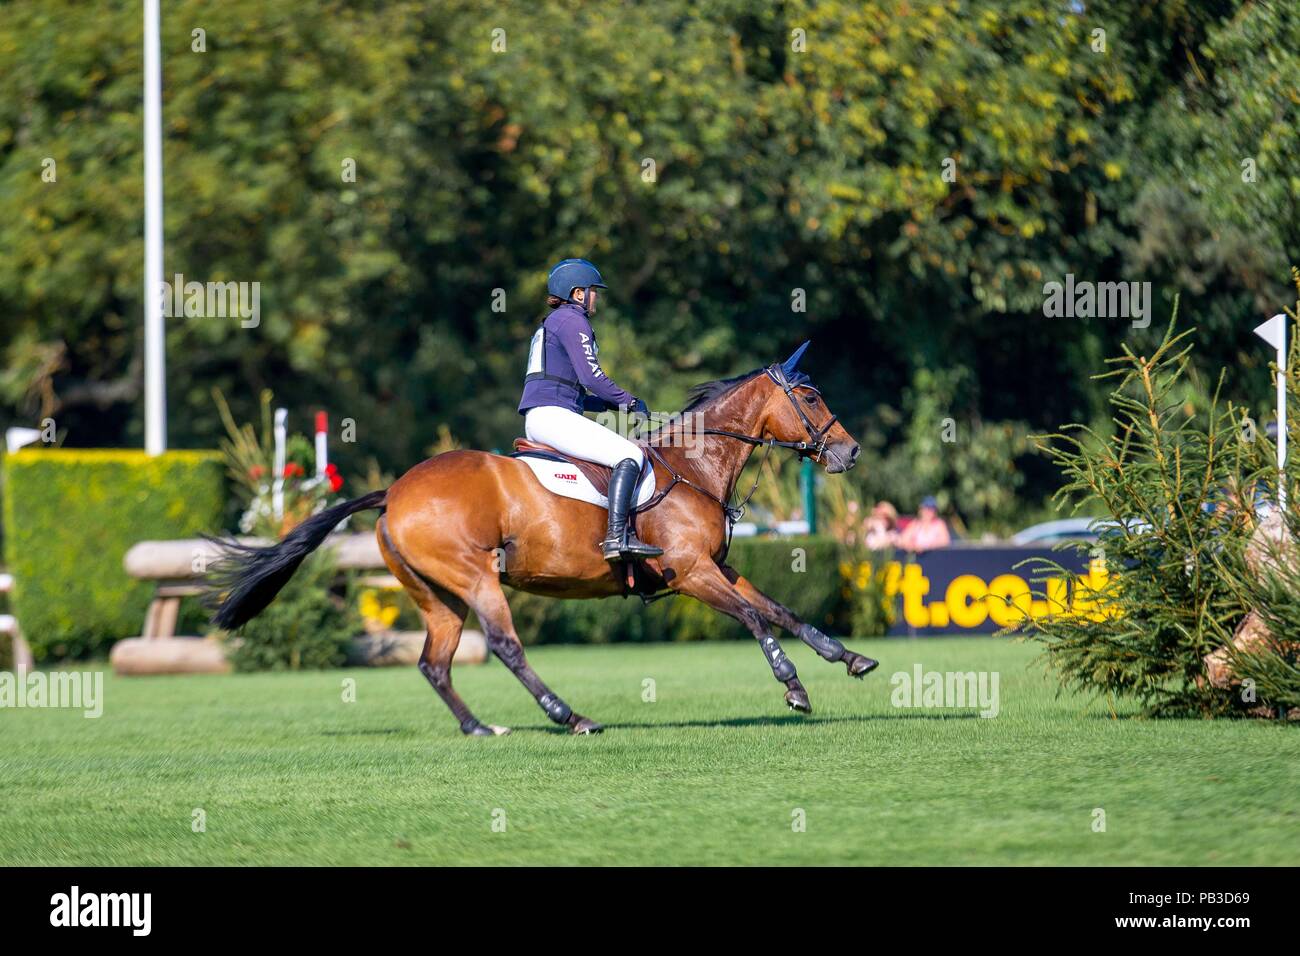 Hickstead, Sussex, UK. 26th July 2018. 4th Place. Abigail Walters riding Perfick Miss Amber. GBR.  The MS Amlin Eventers Challenge. Longines FEI Jumping Nations Cup of Great Britain at the BHS Royal International Horse Show. All England Jumping Course. Hickstead. Great Britain. 26/07/2018. Credit: Sport In Pictures/Alamy Live News Stock Photo